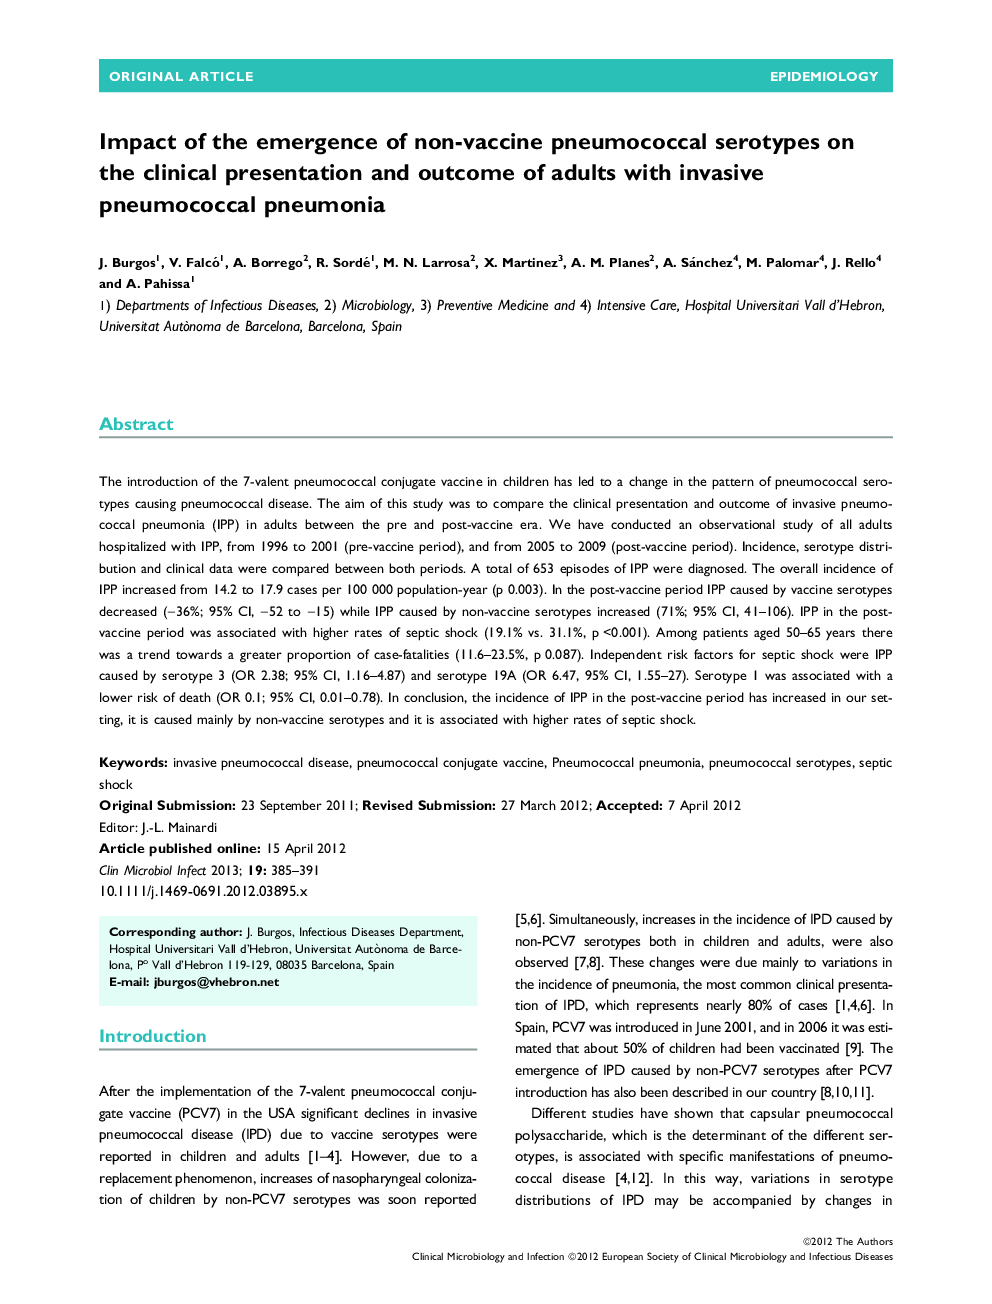 Impact of the emergence of non-vaccine pneumococcal serotypes on the clinical presentation and outcome of adults with invasive pneumococcal pneumonia 